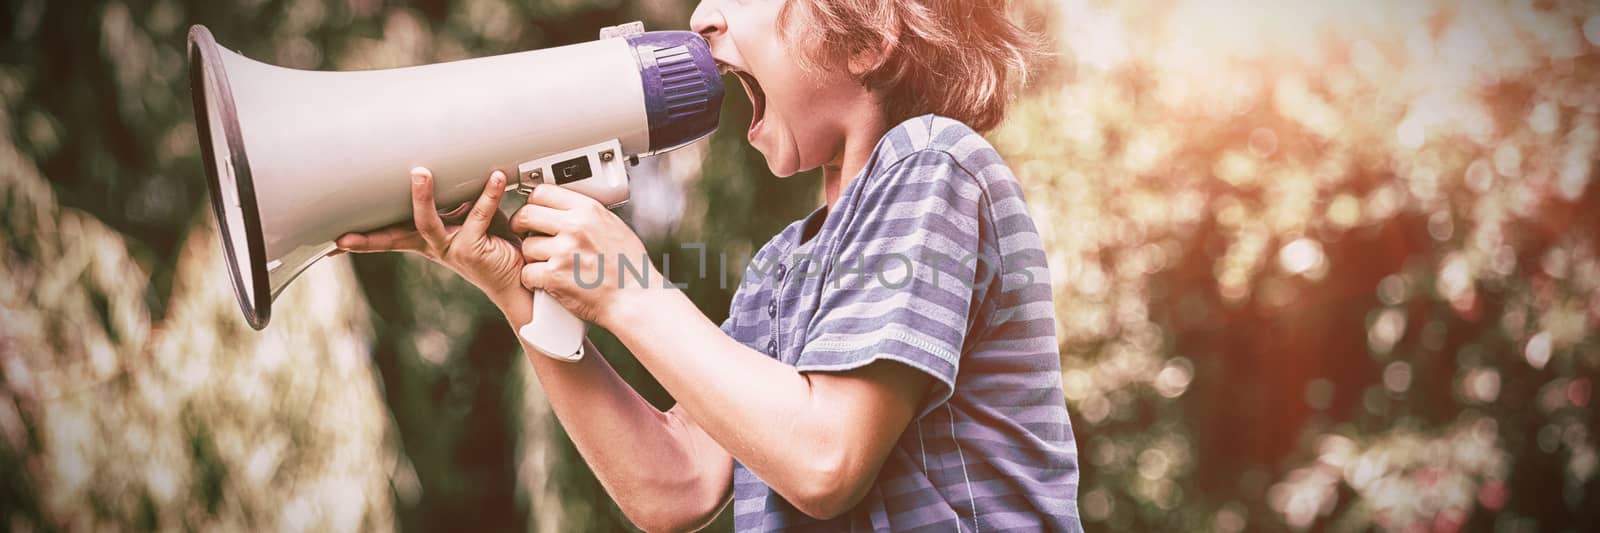 A little boy is screaming with a megaphone on a park